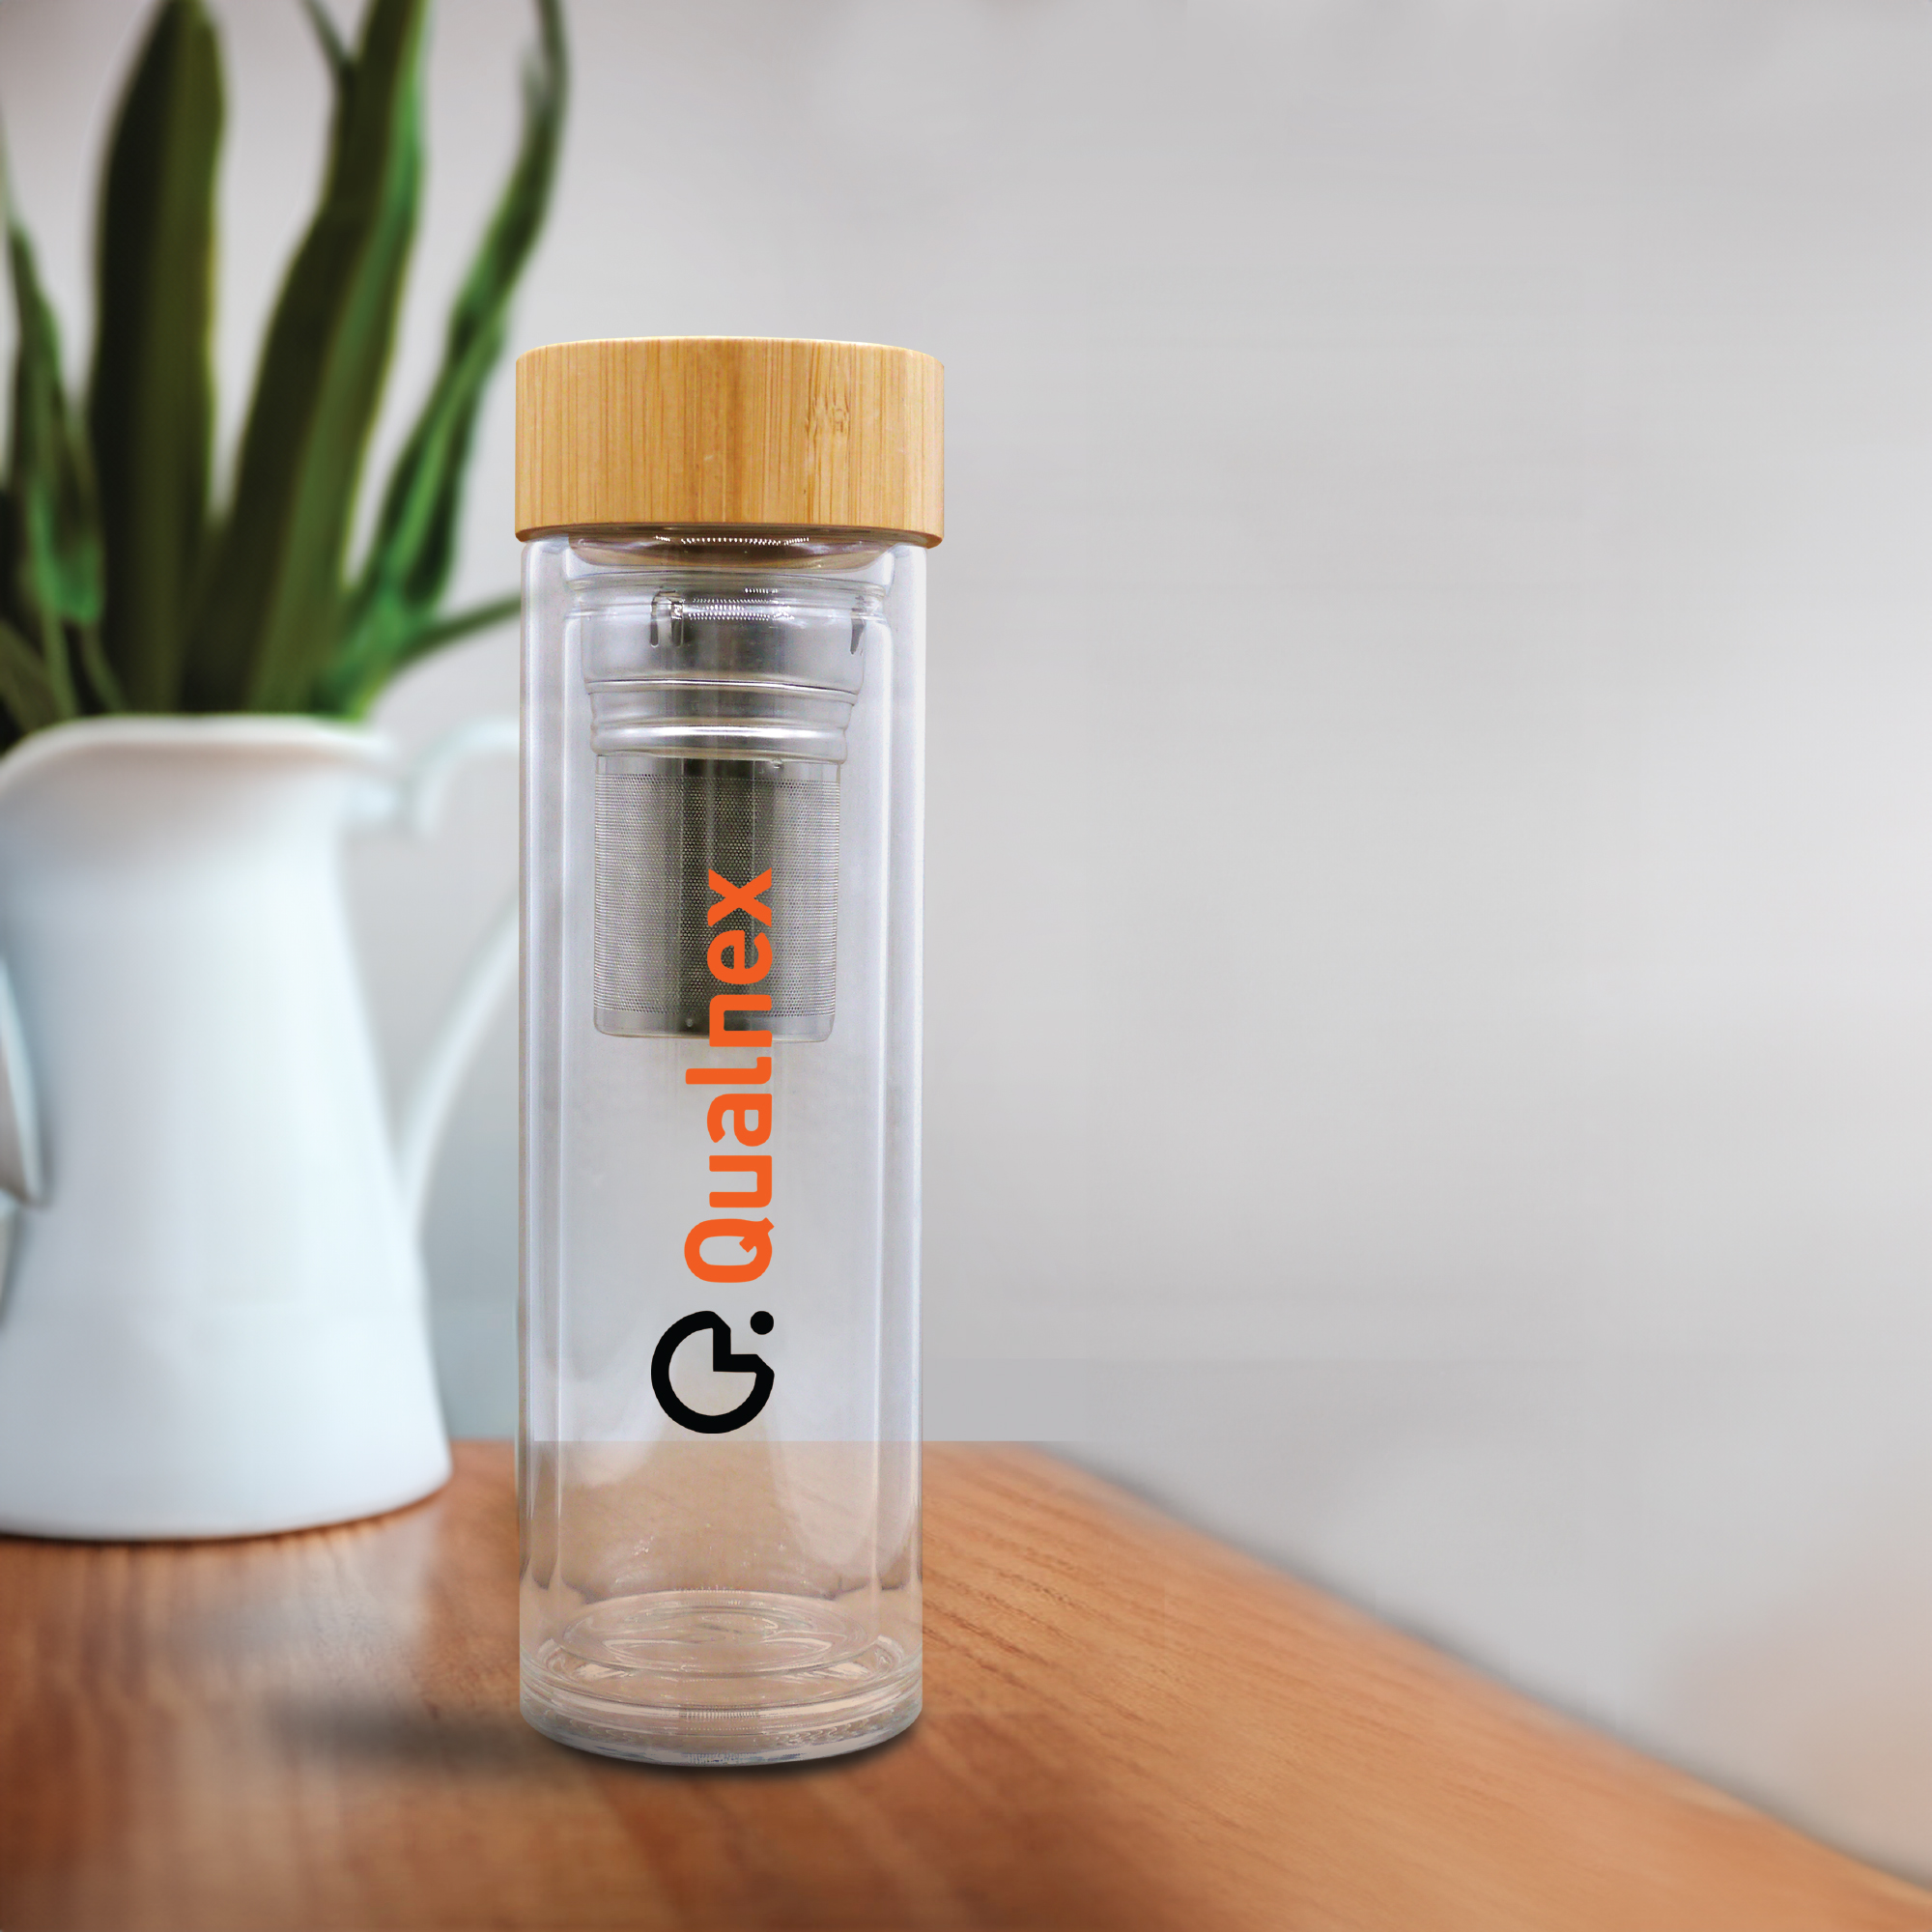 Glass & Bamboo Flask: Stylish eco-friendly beverage container with bamboo accents.